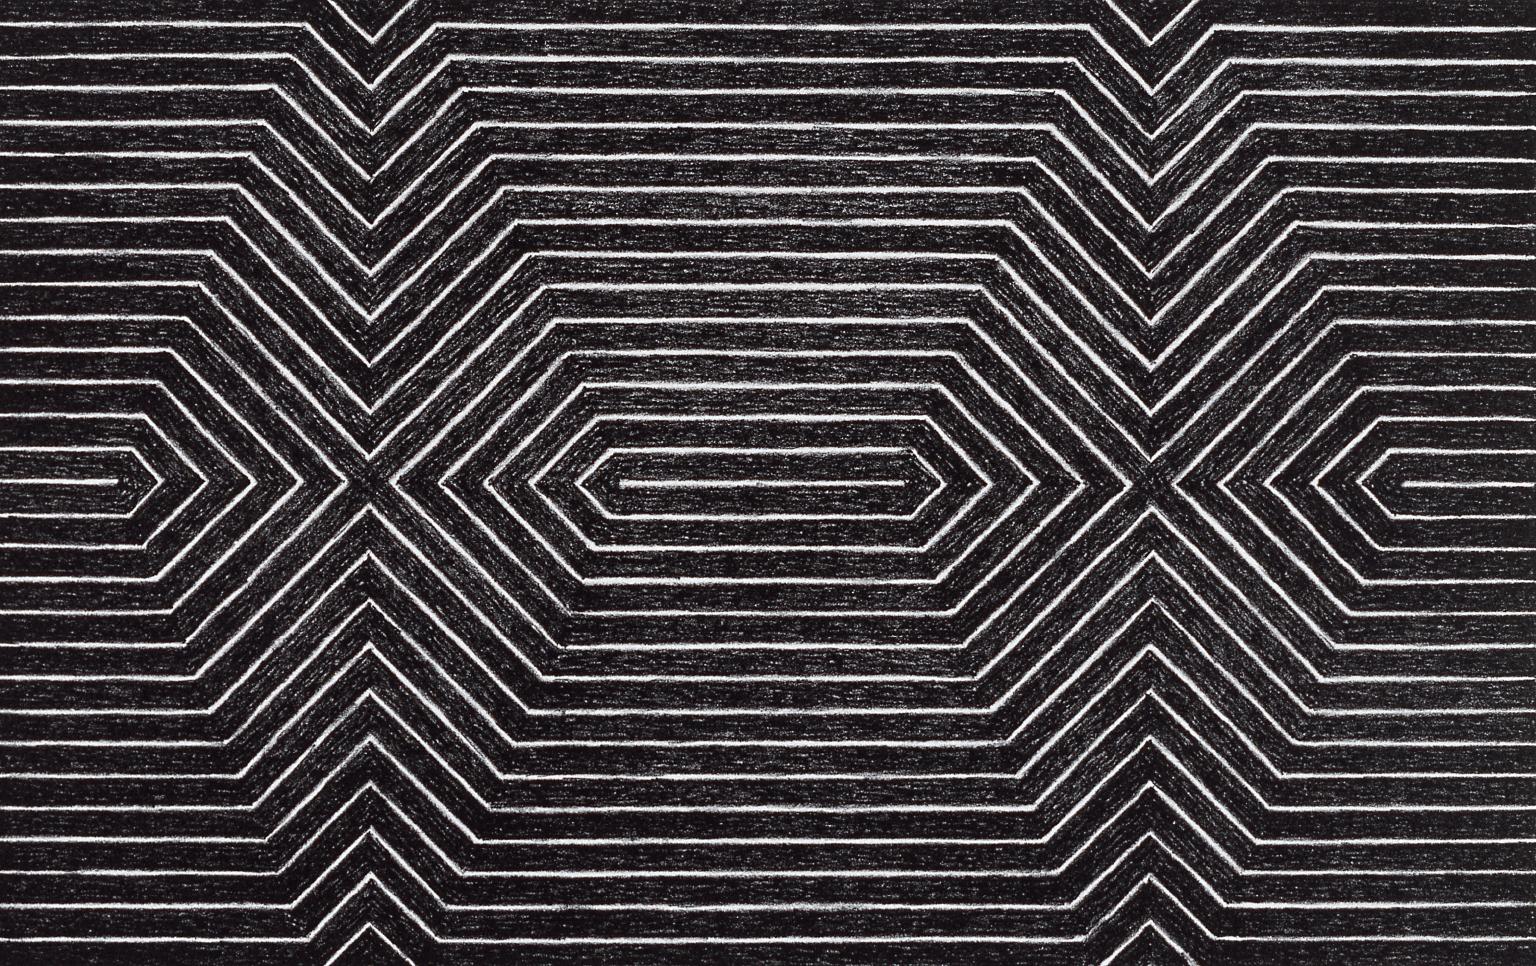 Frank Stella ‘[title Not Known]’, 1967© Ars, Ny And - HD Wallpaper 